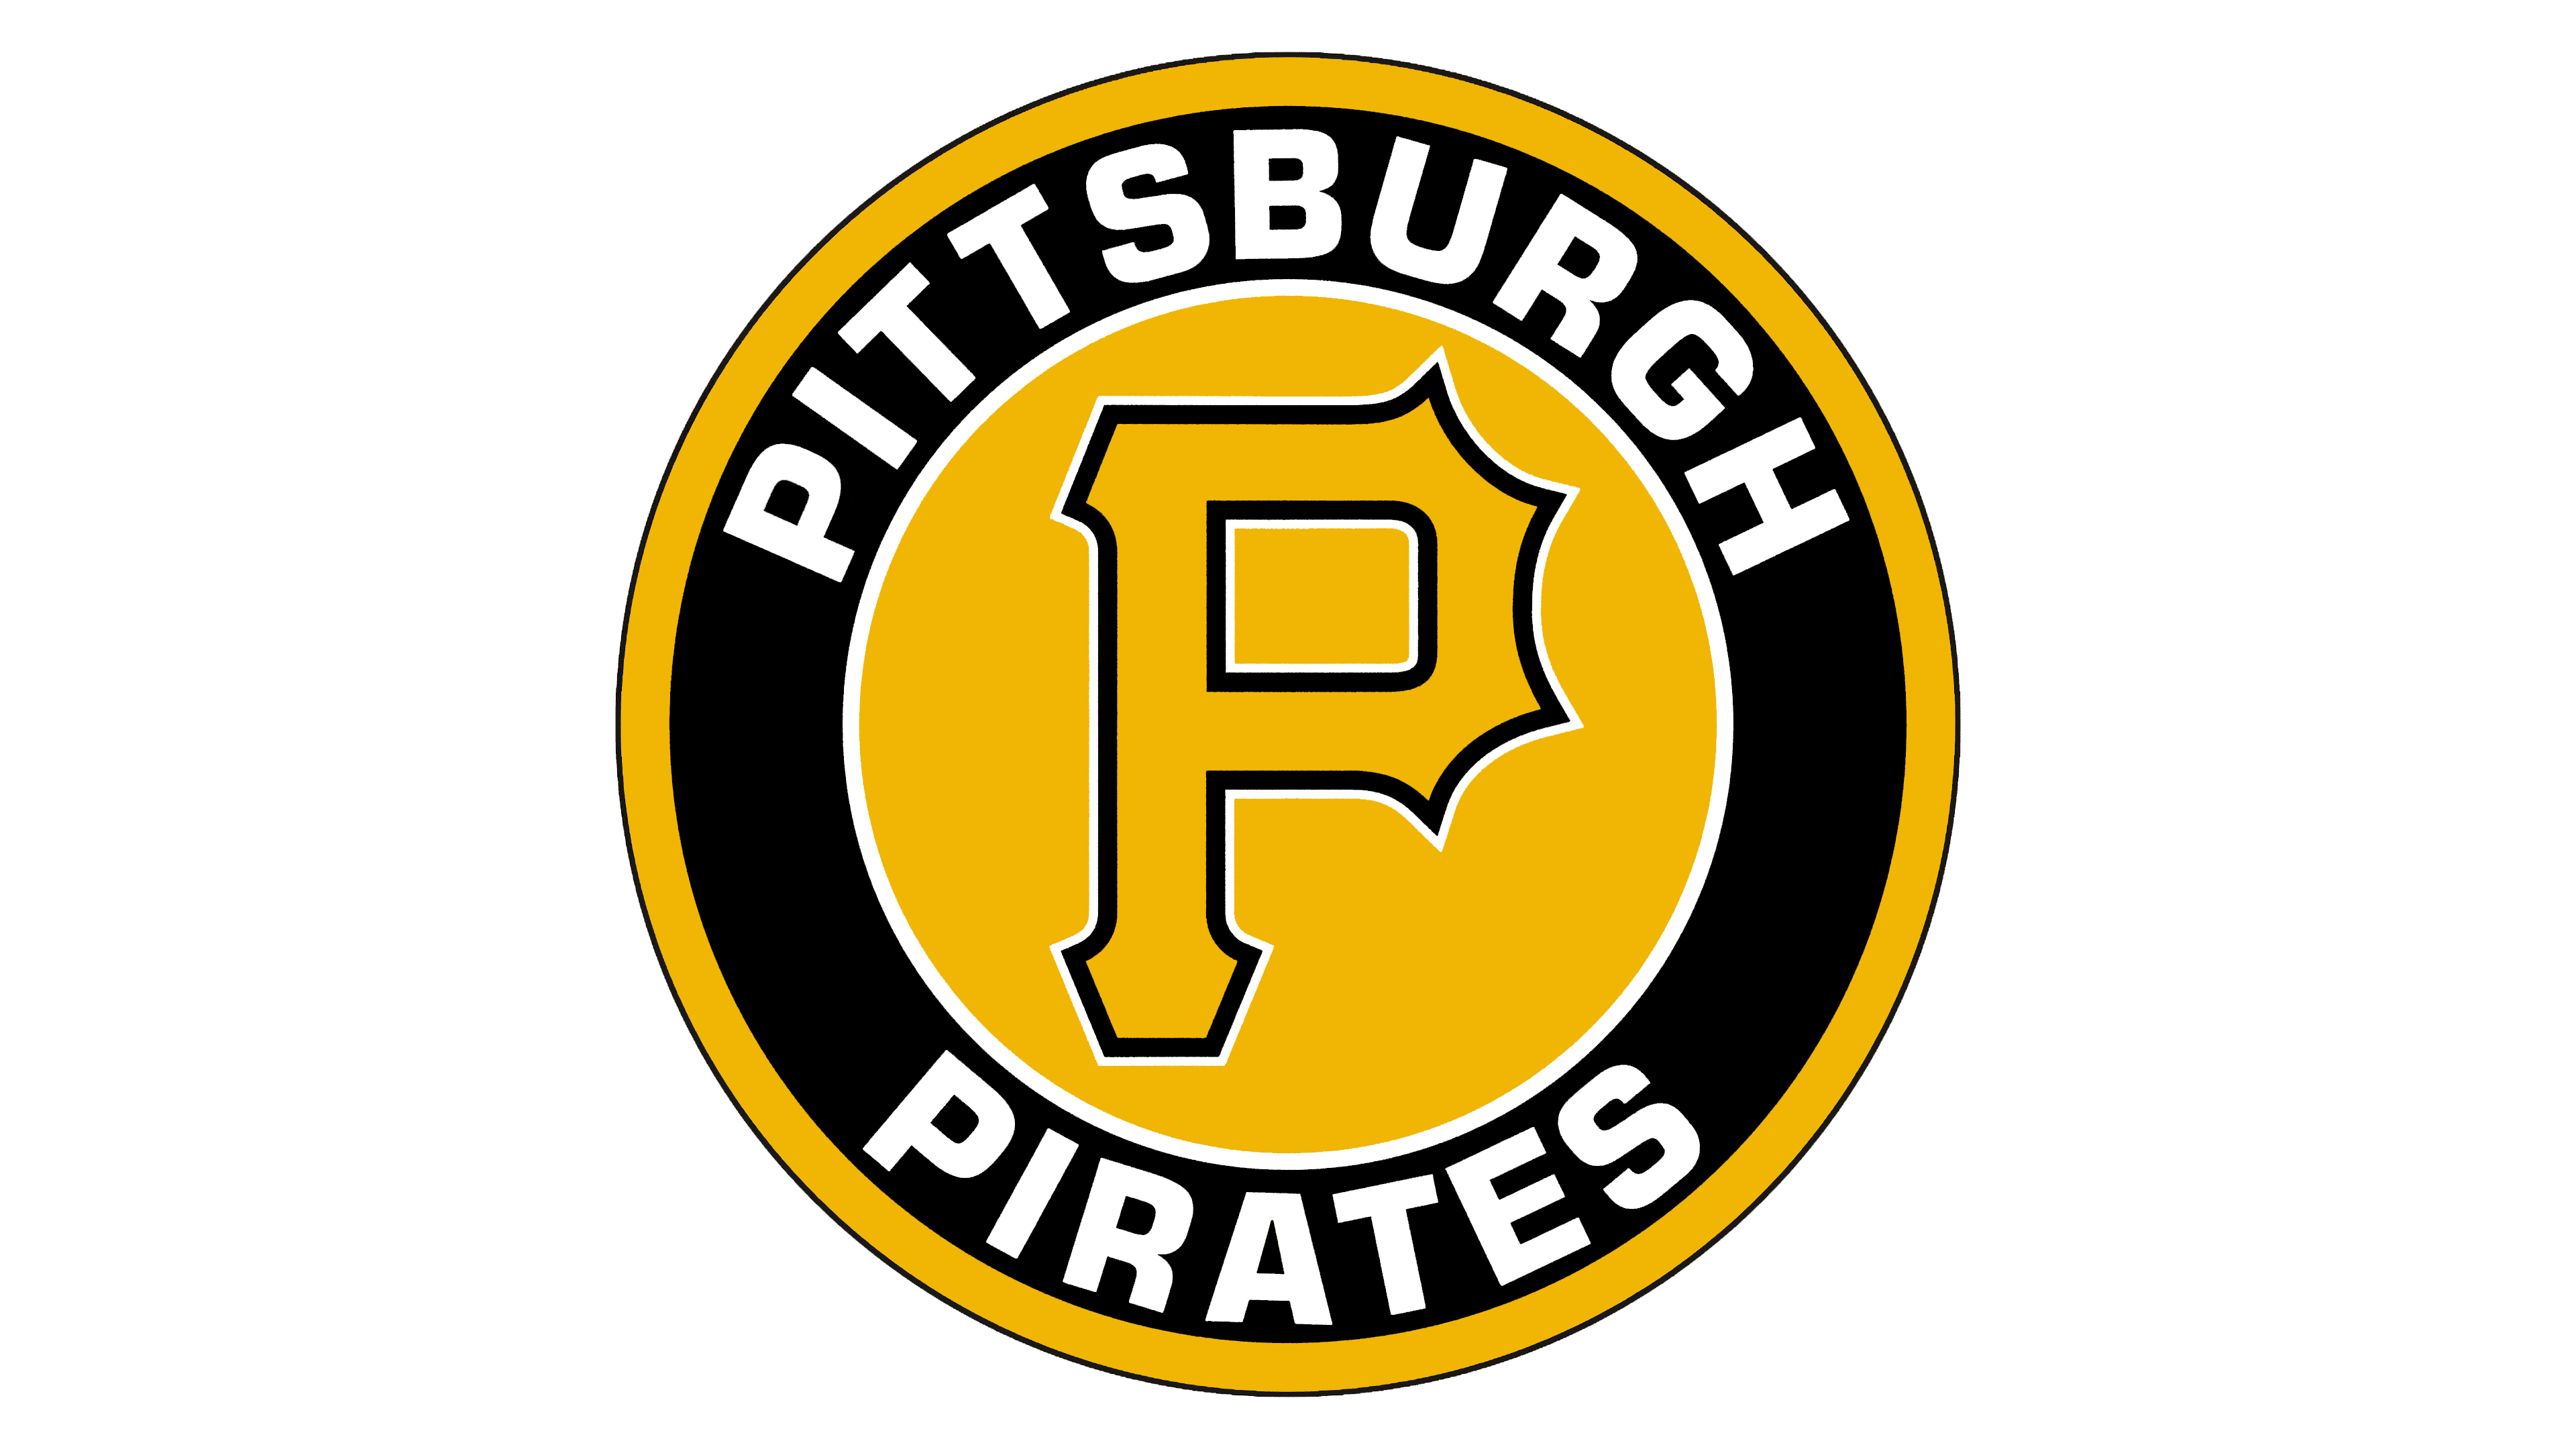 whats pittsburgh pirate fonts